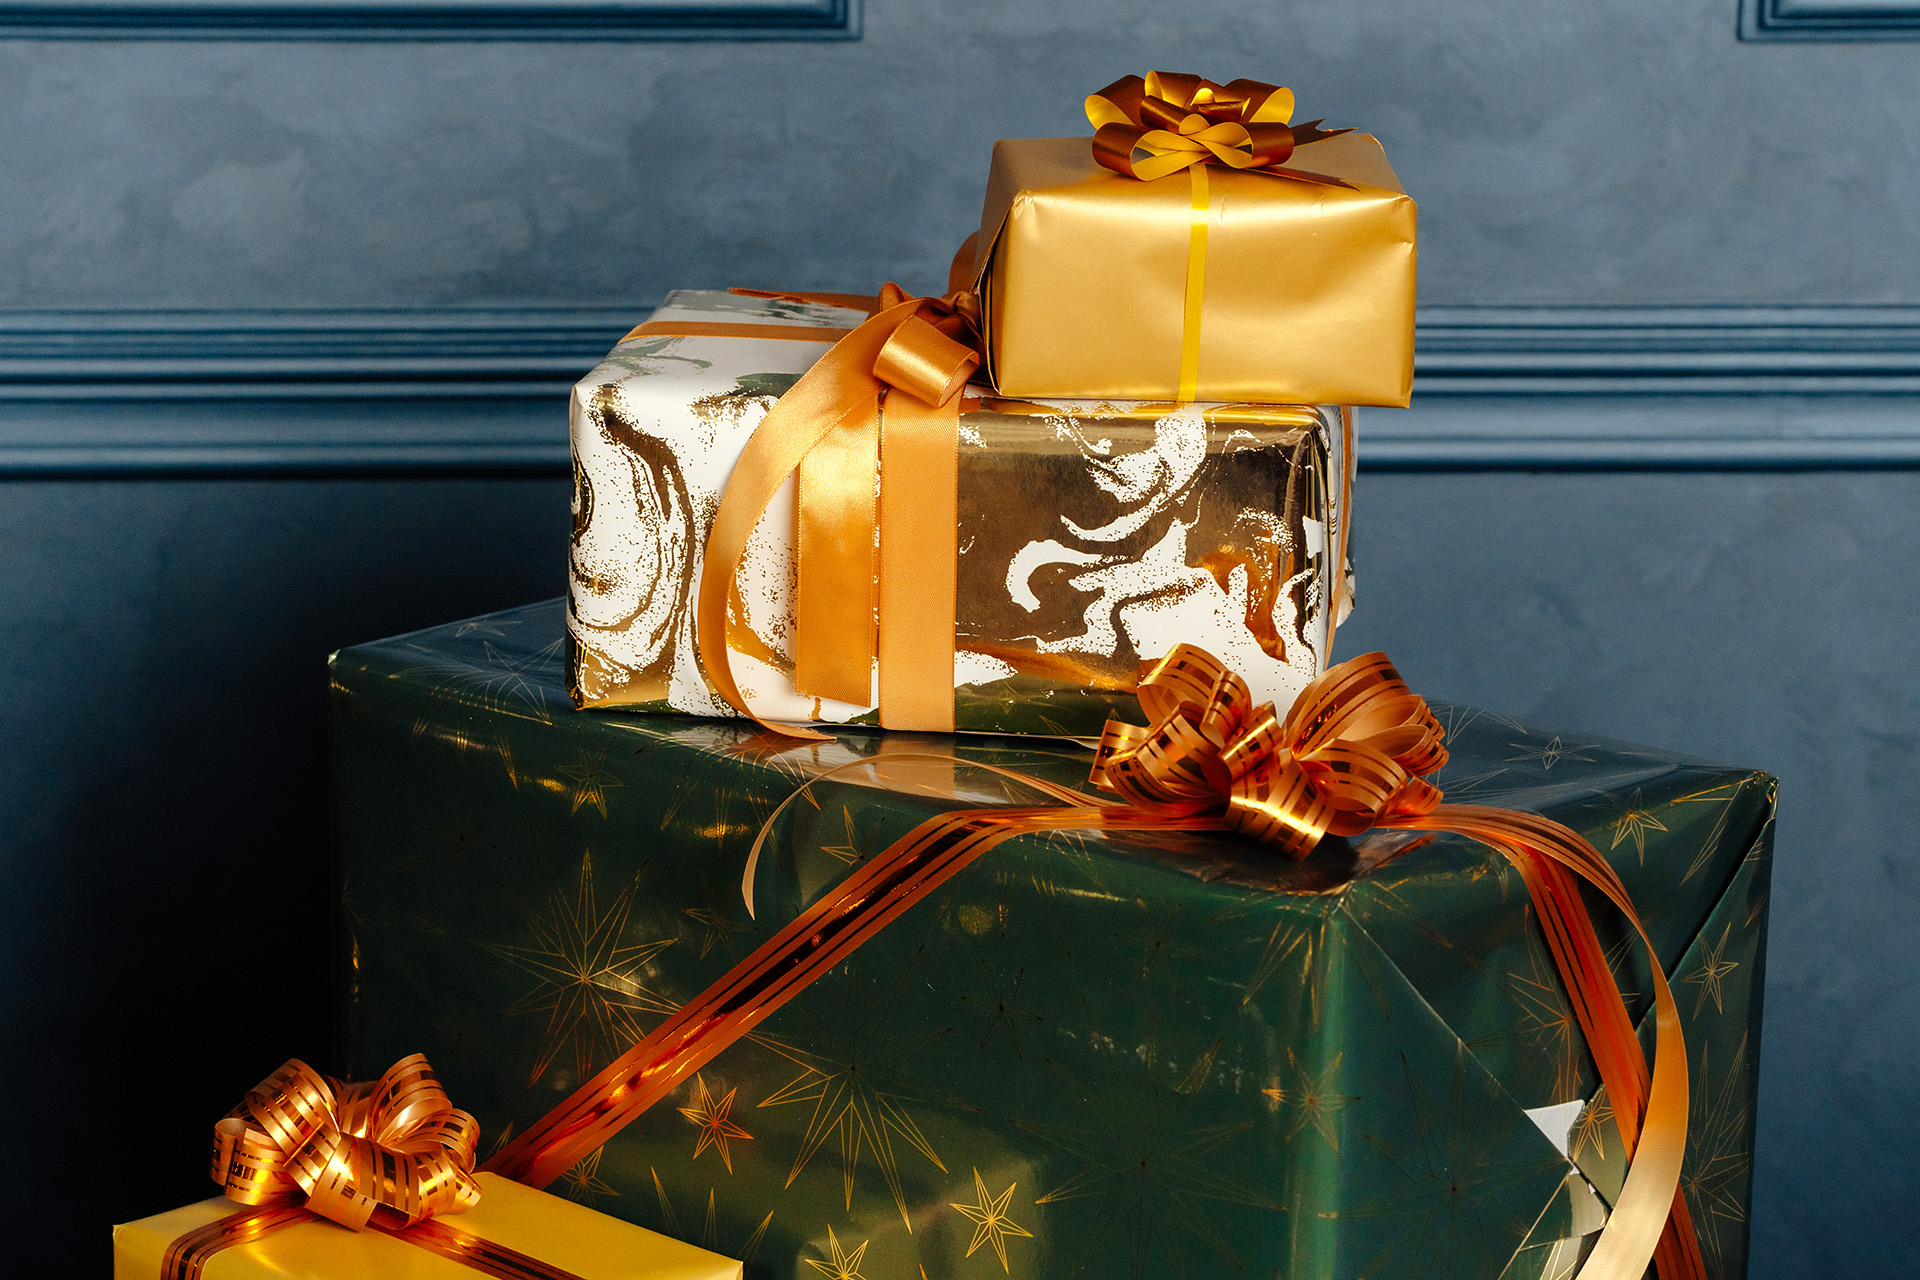 A photograph of a pile of green and gold wrapped presents.